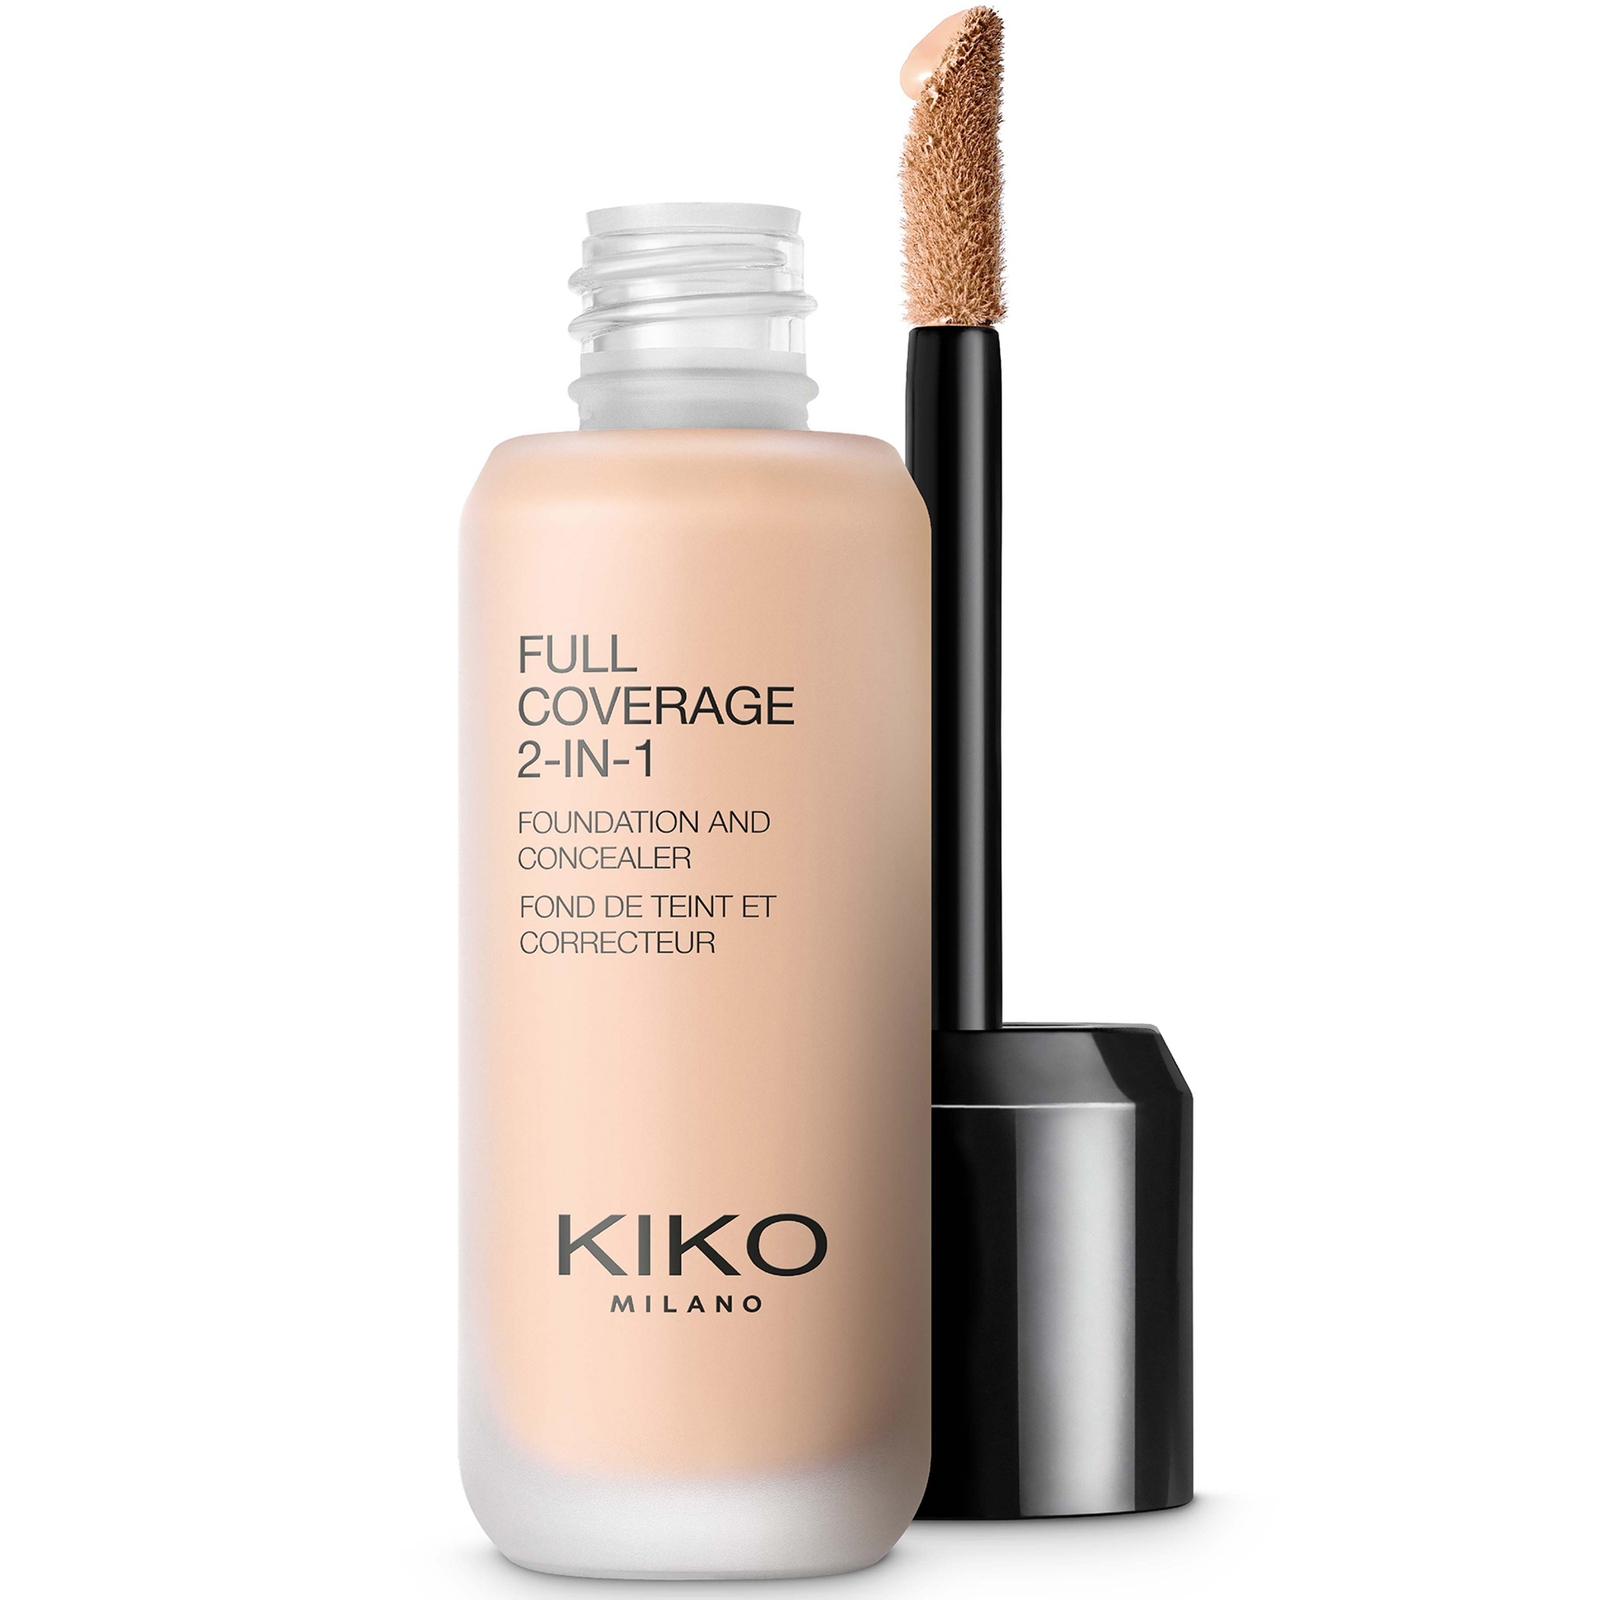 Image of KIKO Milano Full Coverage 2-in-1 Foundation and Concealer 25ml (Various Shades) - 15 Warm Rose